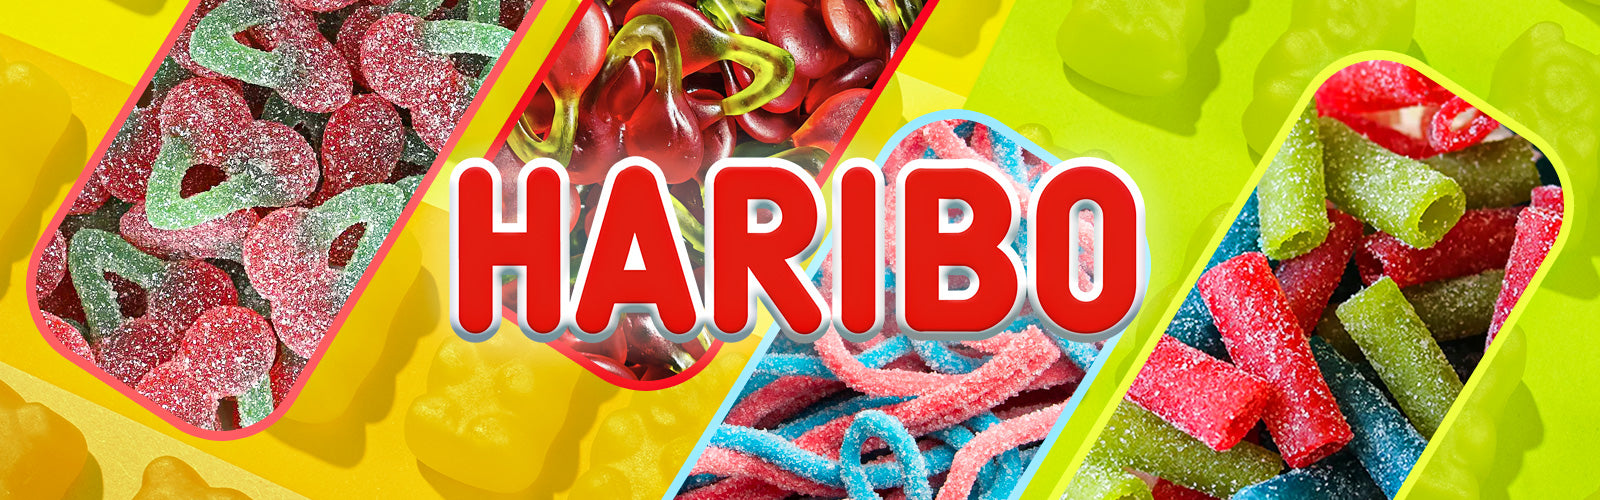 Harribo in collection banner